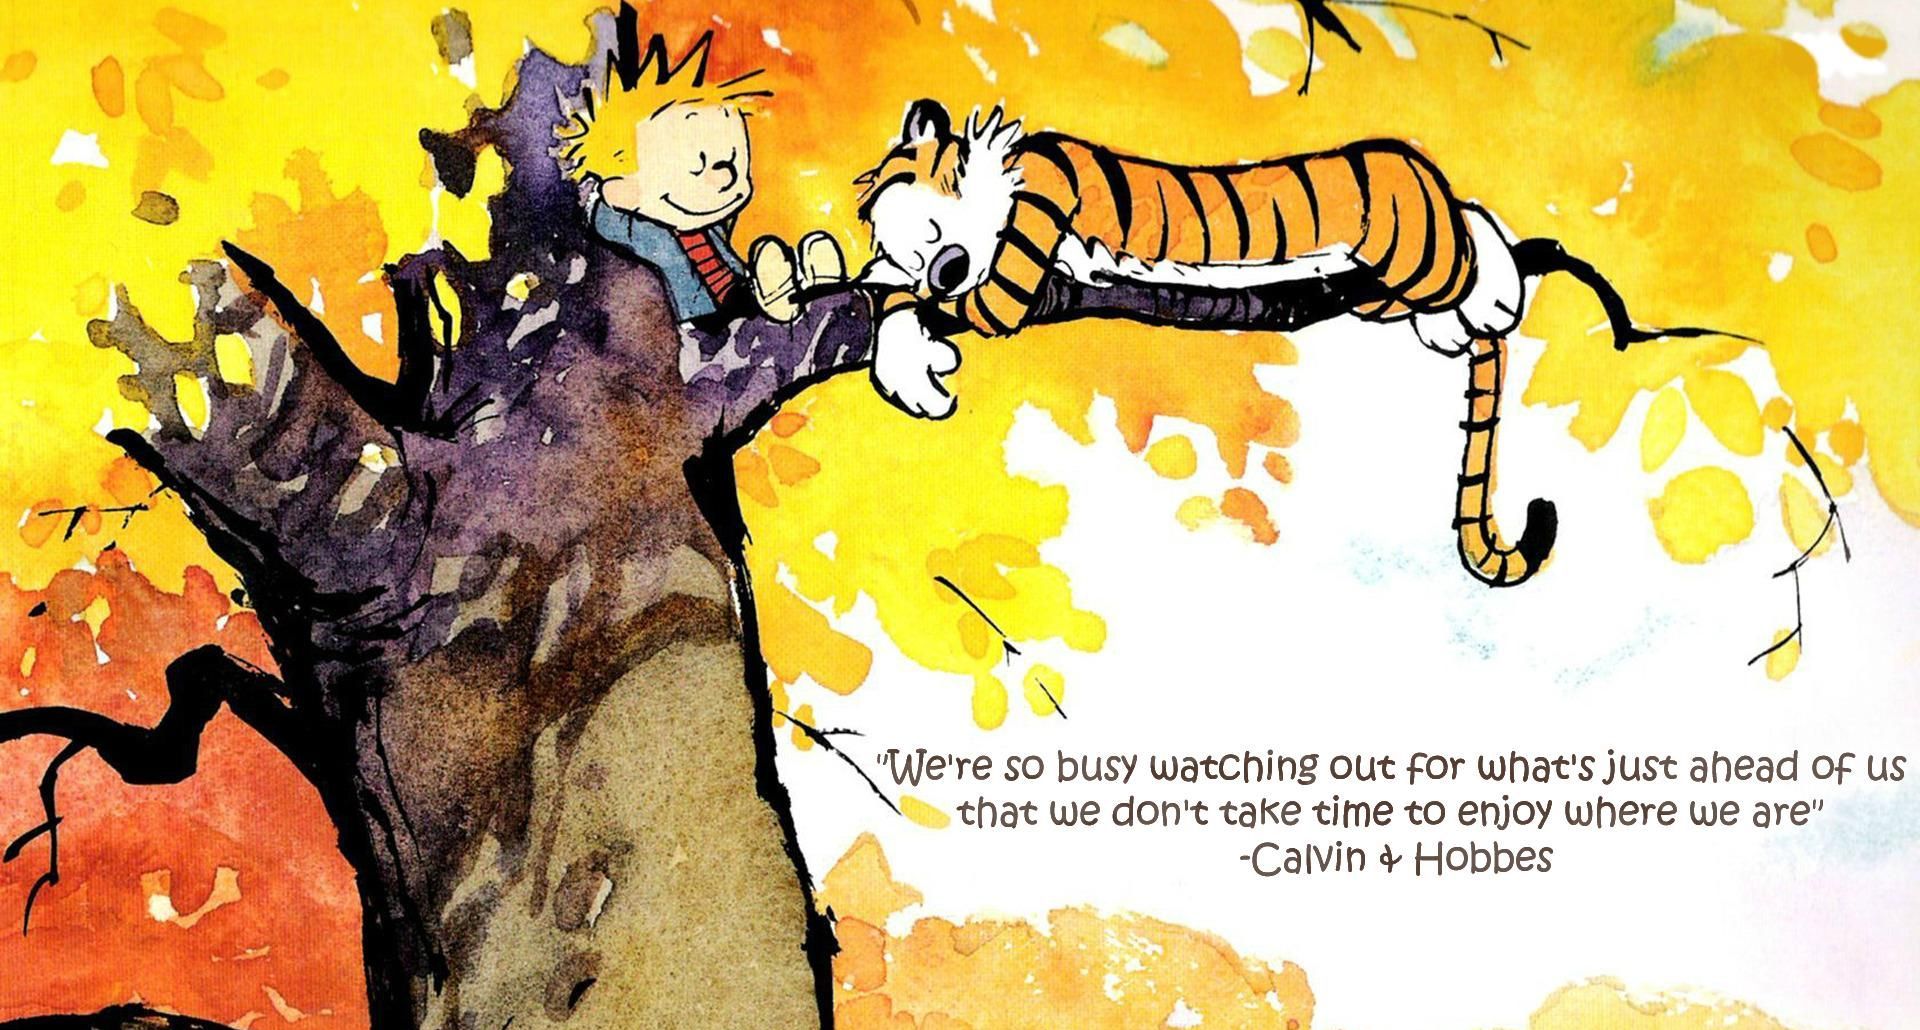 1920 X 1080 Px Widescreen Calvin And Hobbes - Calvin And Hobbes Mindfulness , HD Wallpaper & Backgrounds